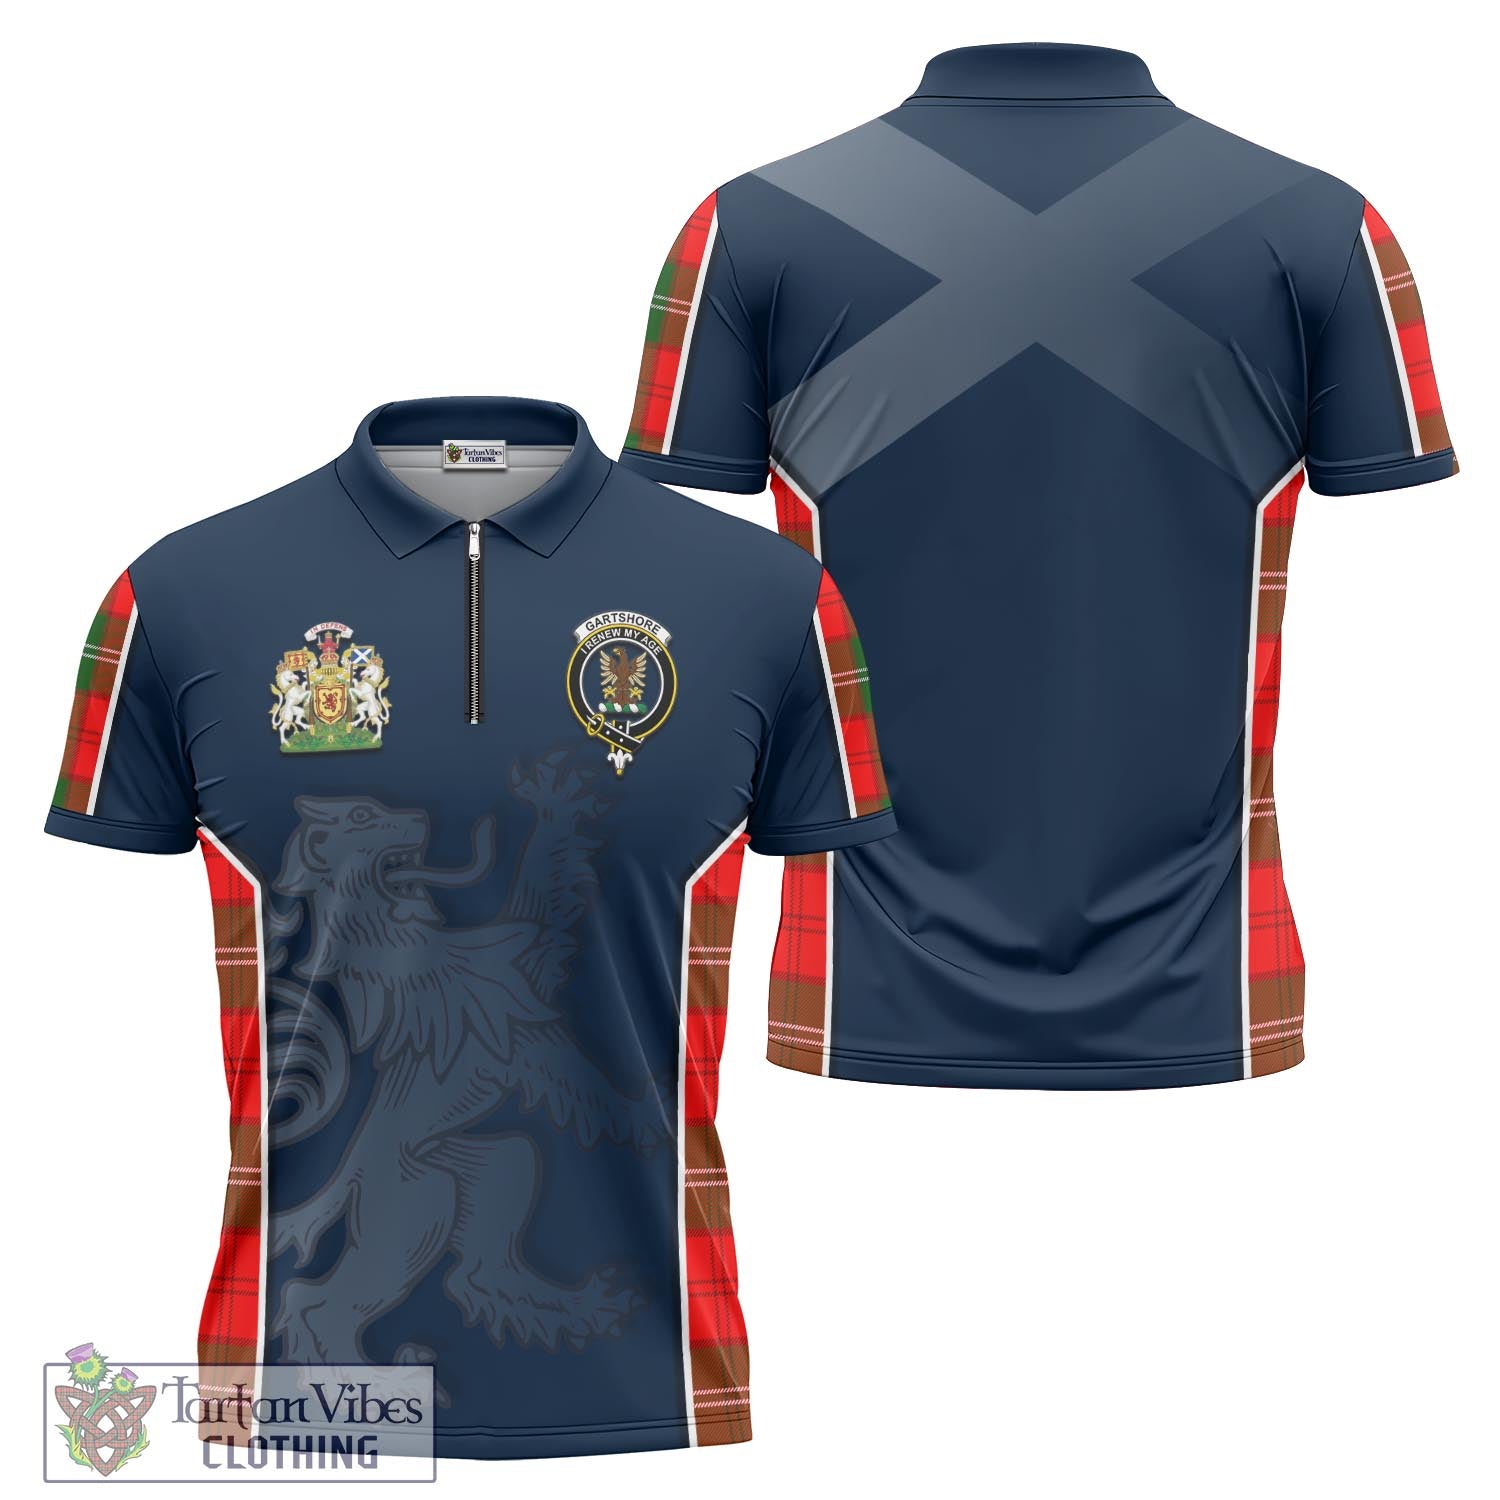 Tartan Vibes Clothing Gartshore Tartan Zipper Polo Shirt with Family Crest and Lion Rampant Vibes Sport Style